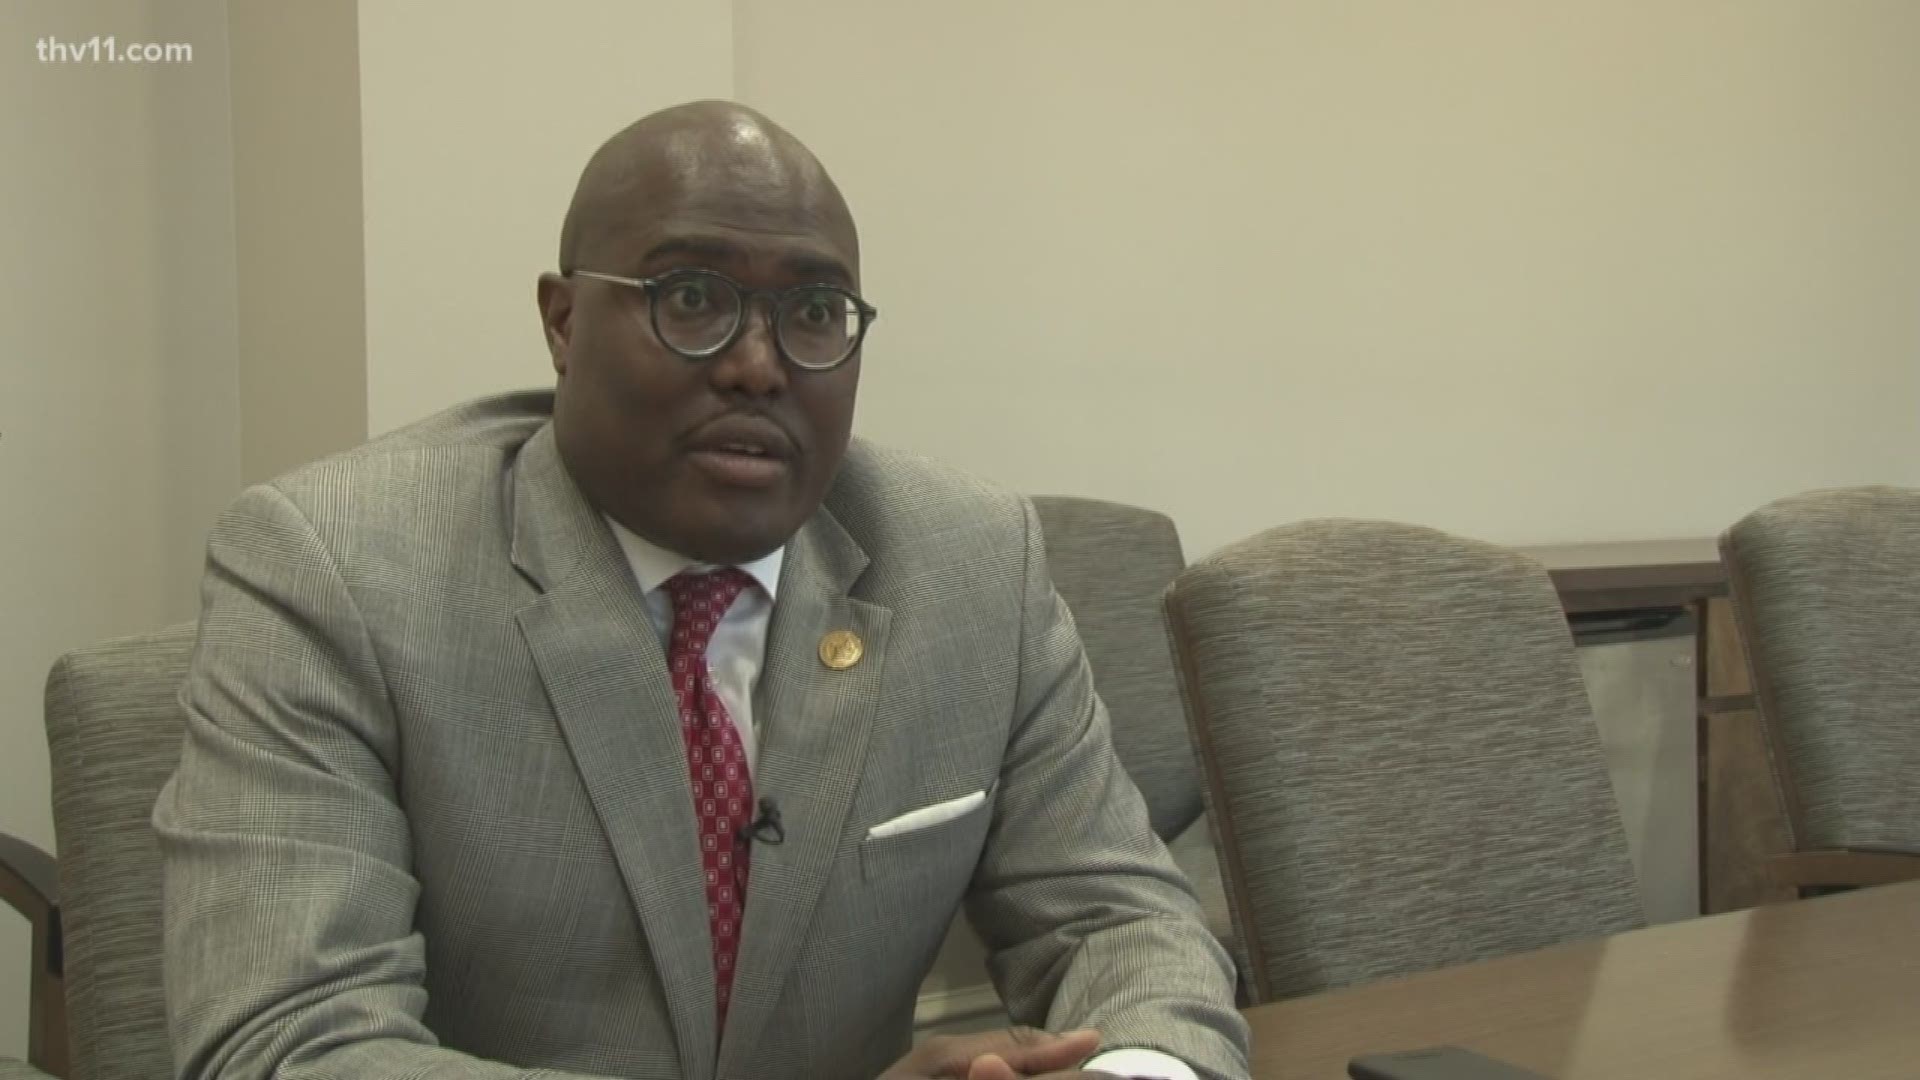 Little Rock mayor Frank Scott Jr. inherited some issues as he won the job late last year.